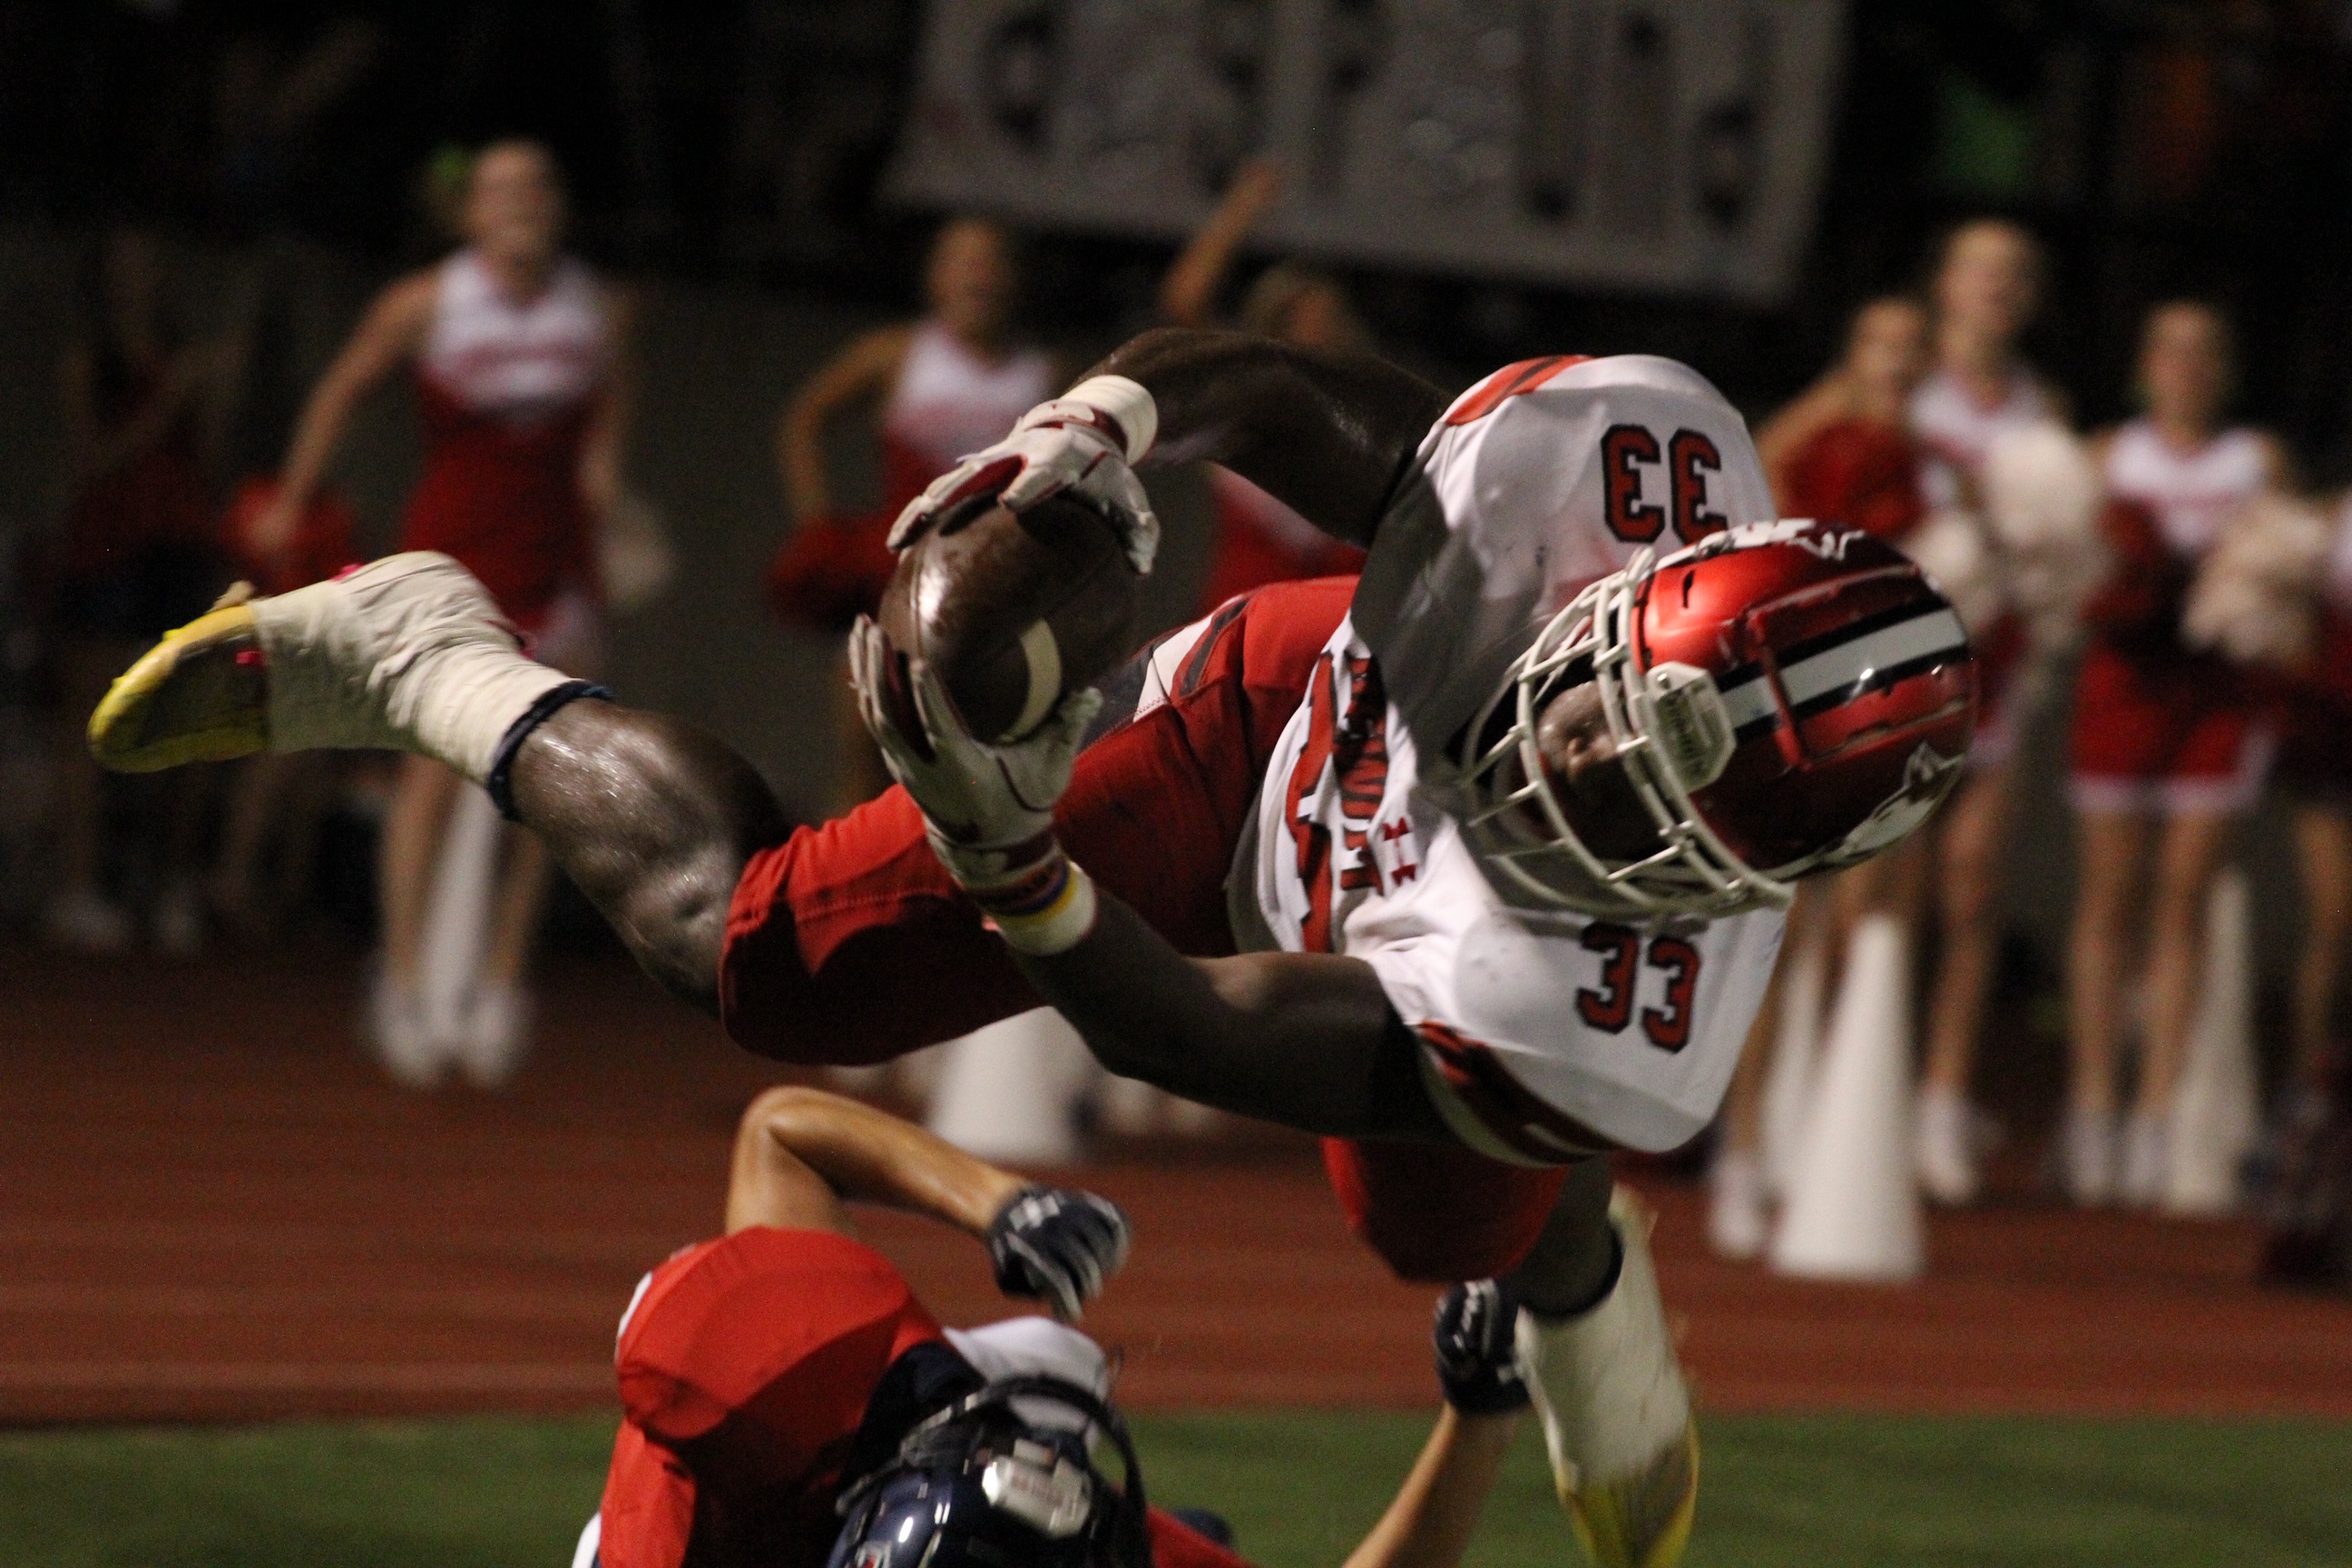 Hewitt-Trussville remains undefeated after outlasting Oak Mountain, 50-33